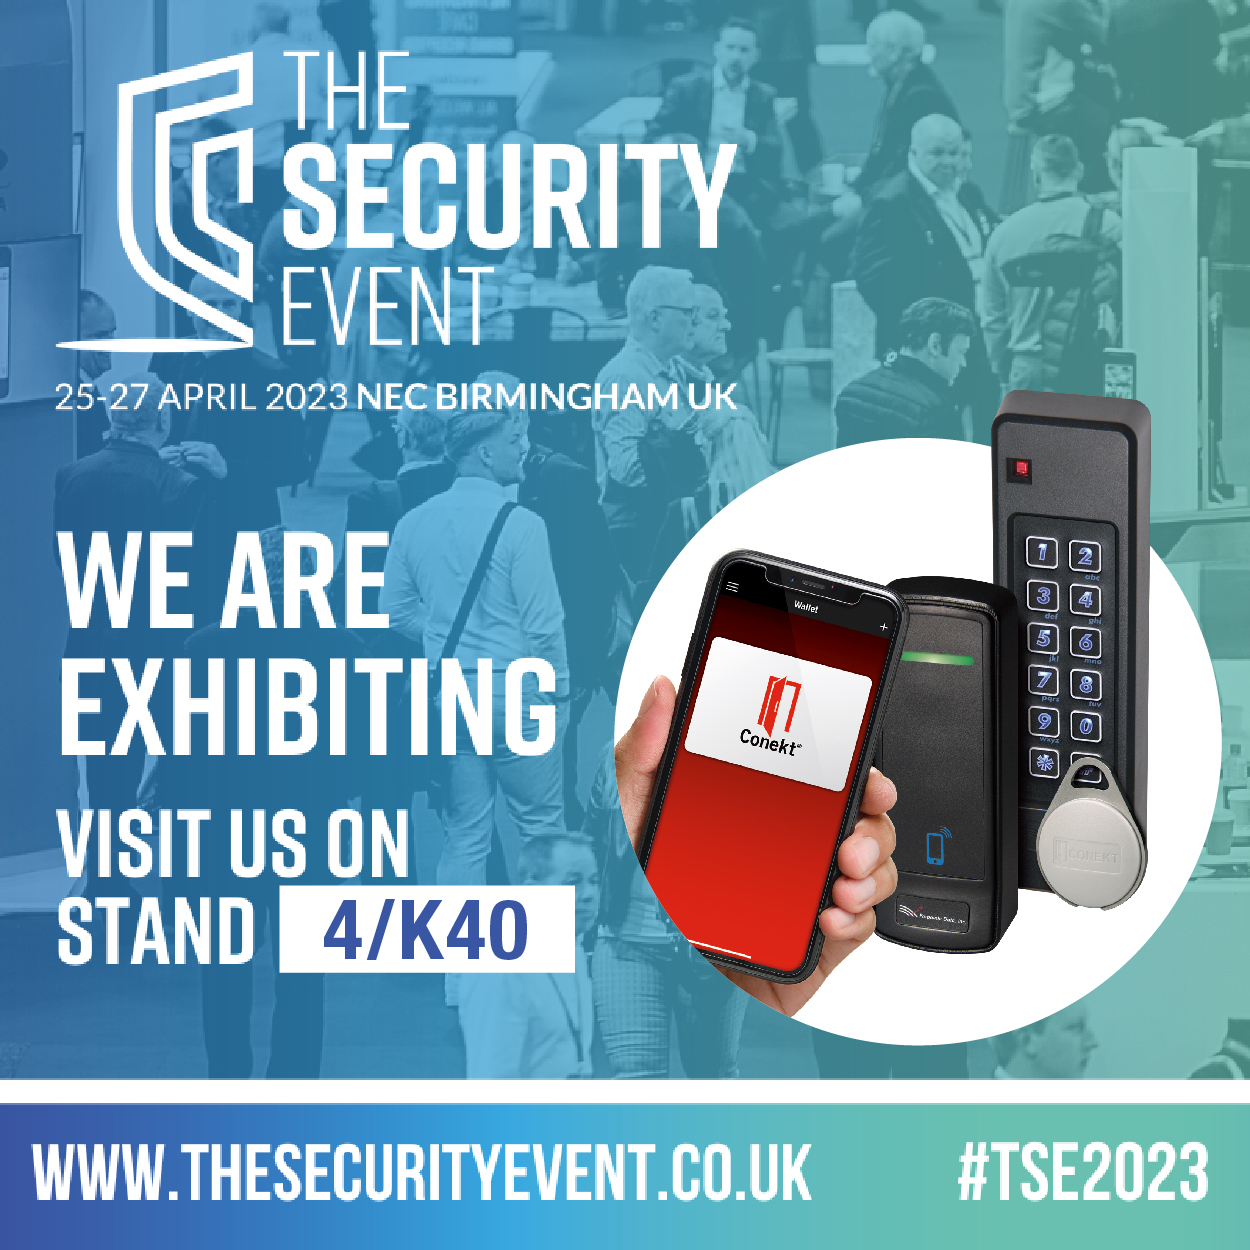 Visit Farpointe Data at The Security Event stand 4/K40